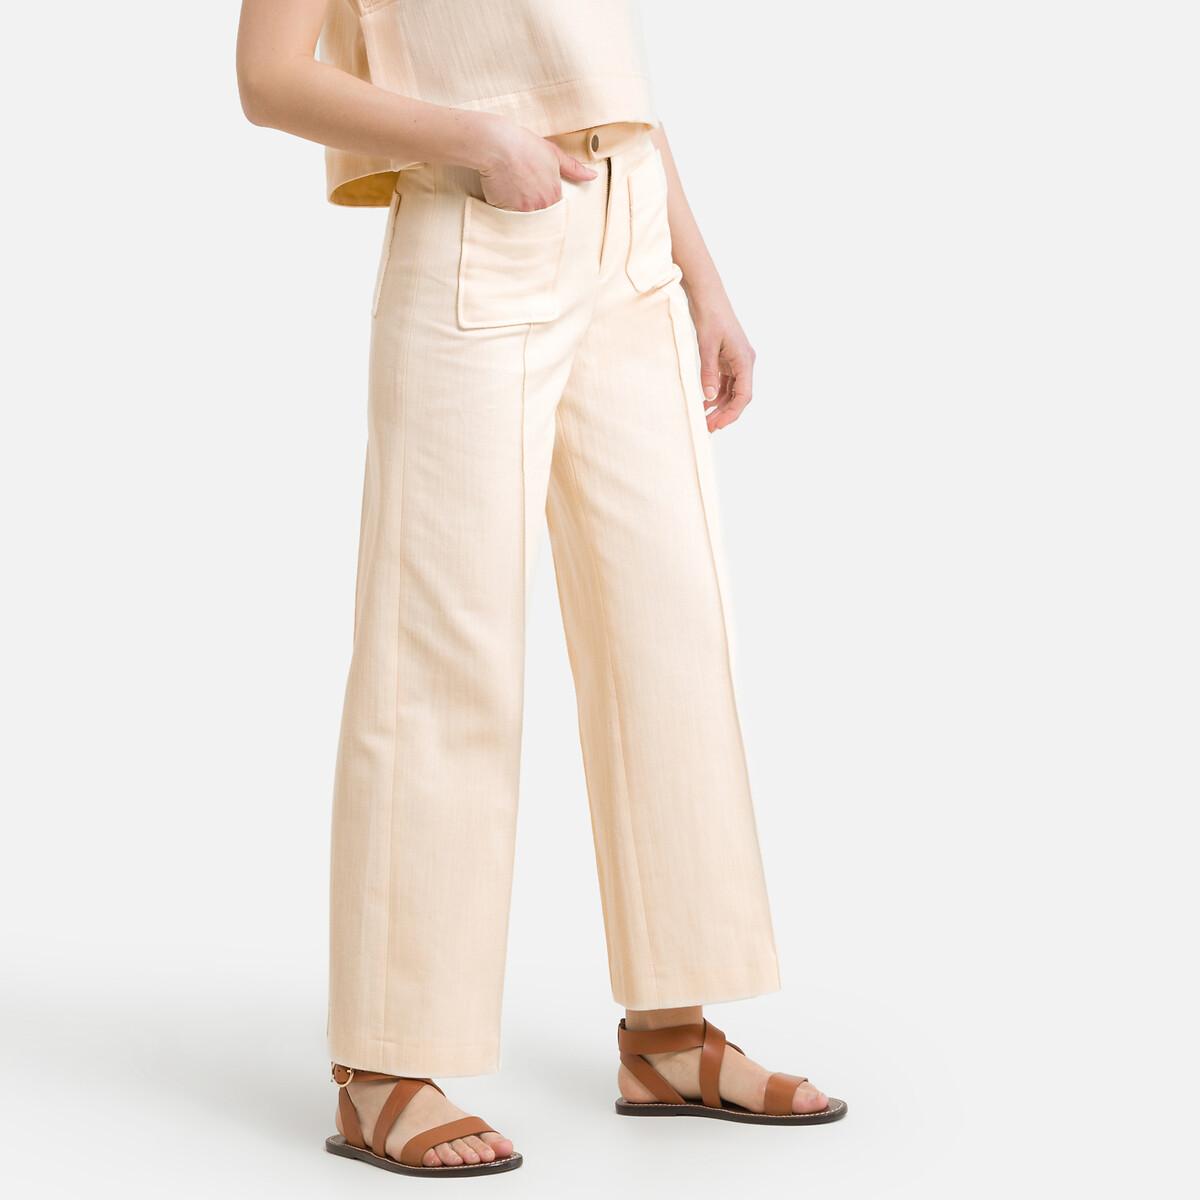 Harry Wide Leg Trousers in Cotton, Cropped Fit Length 29.5"